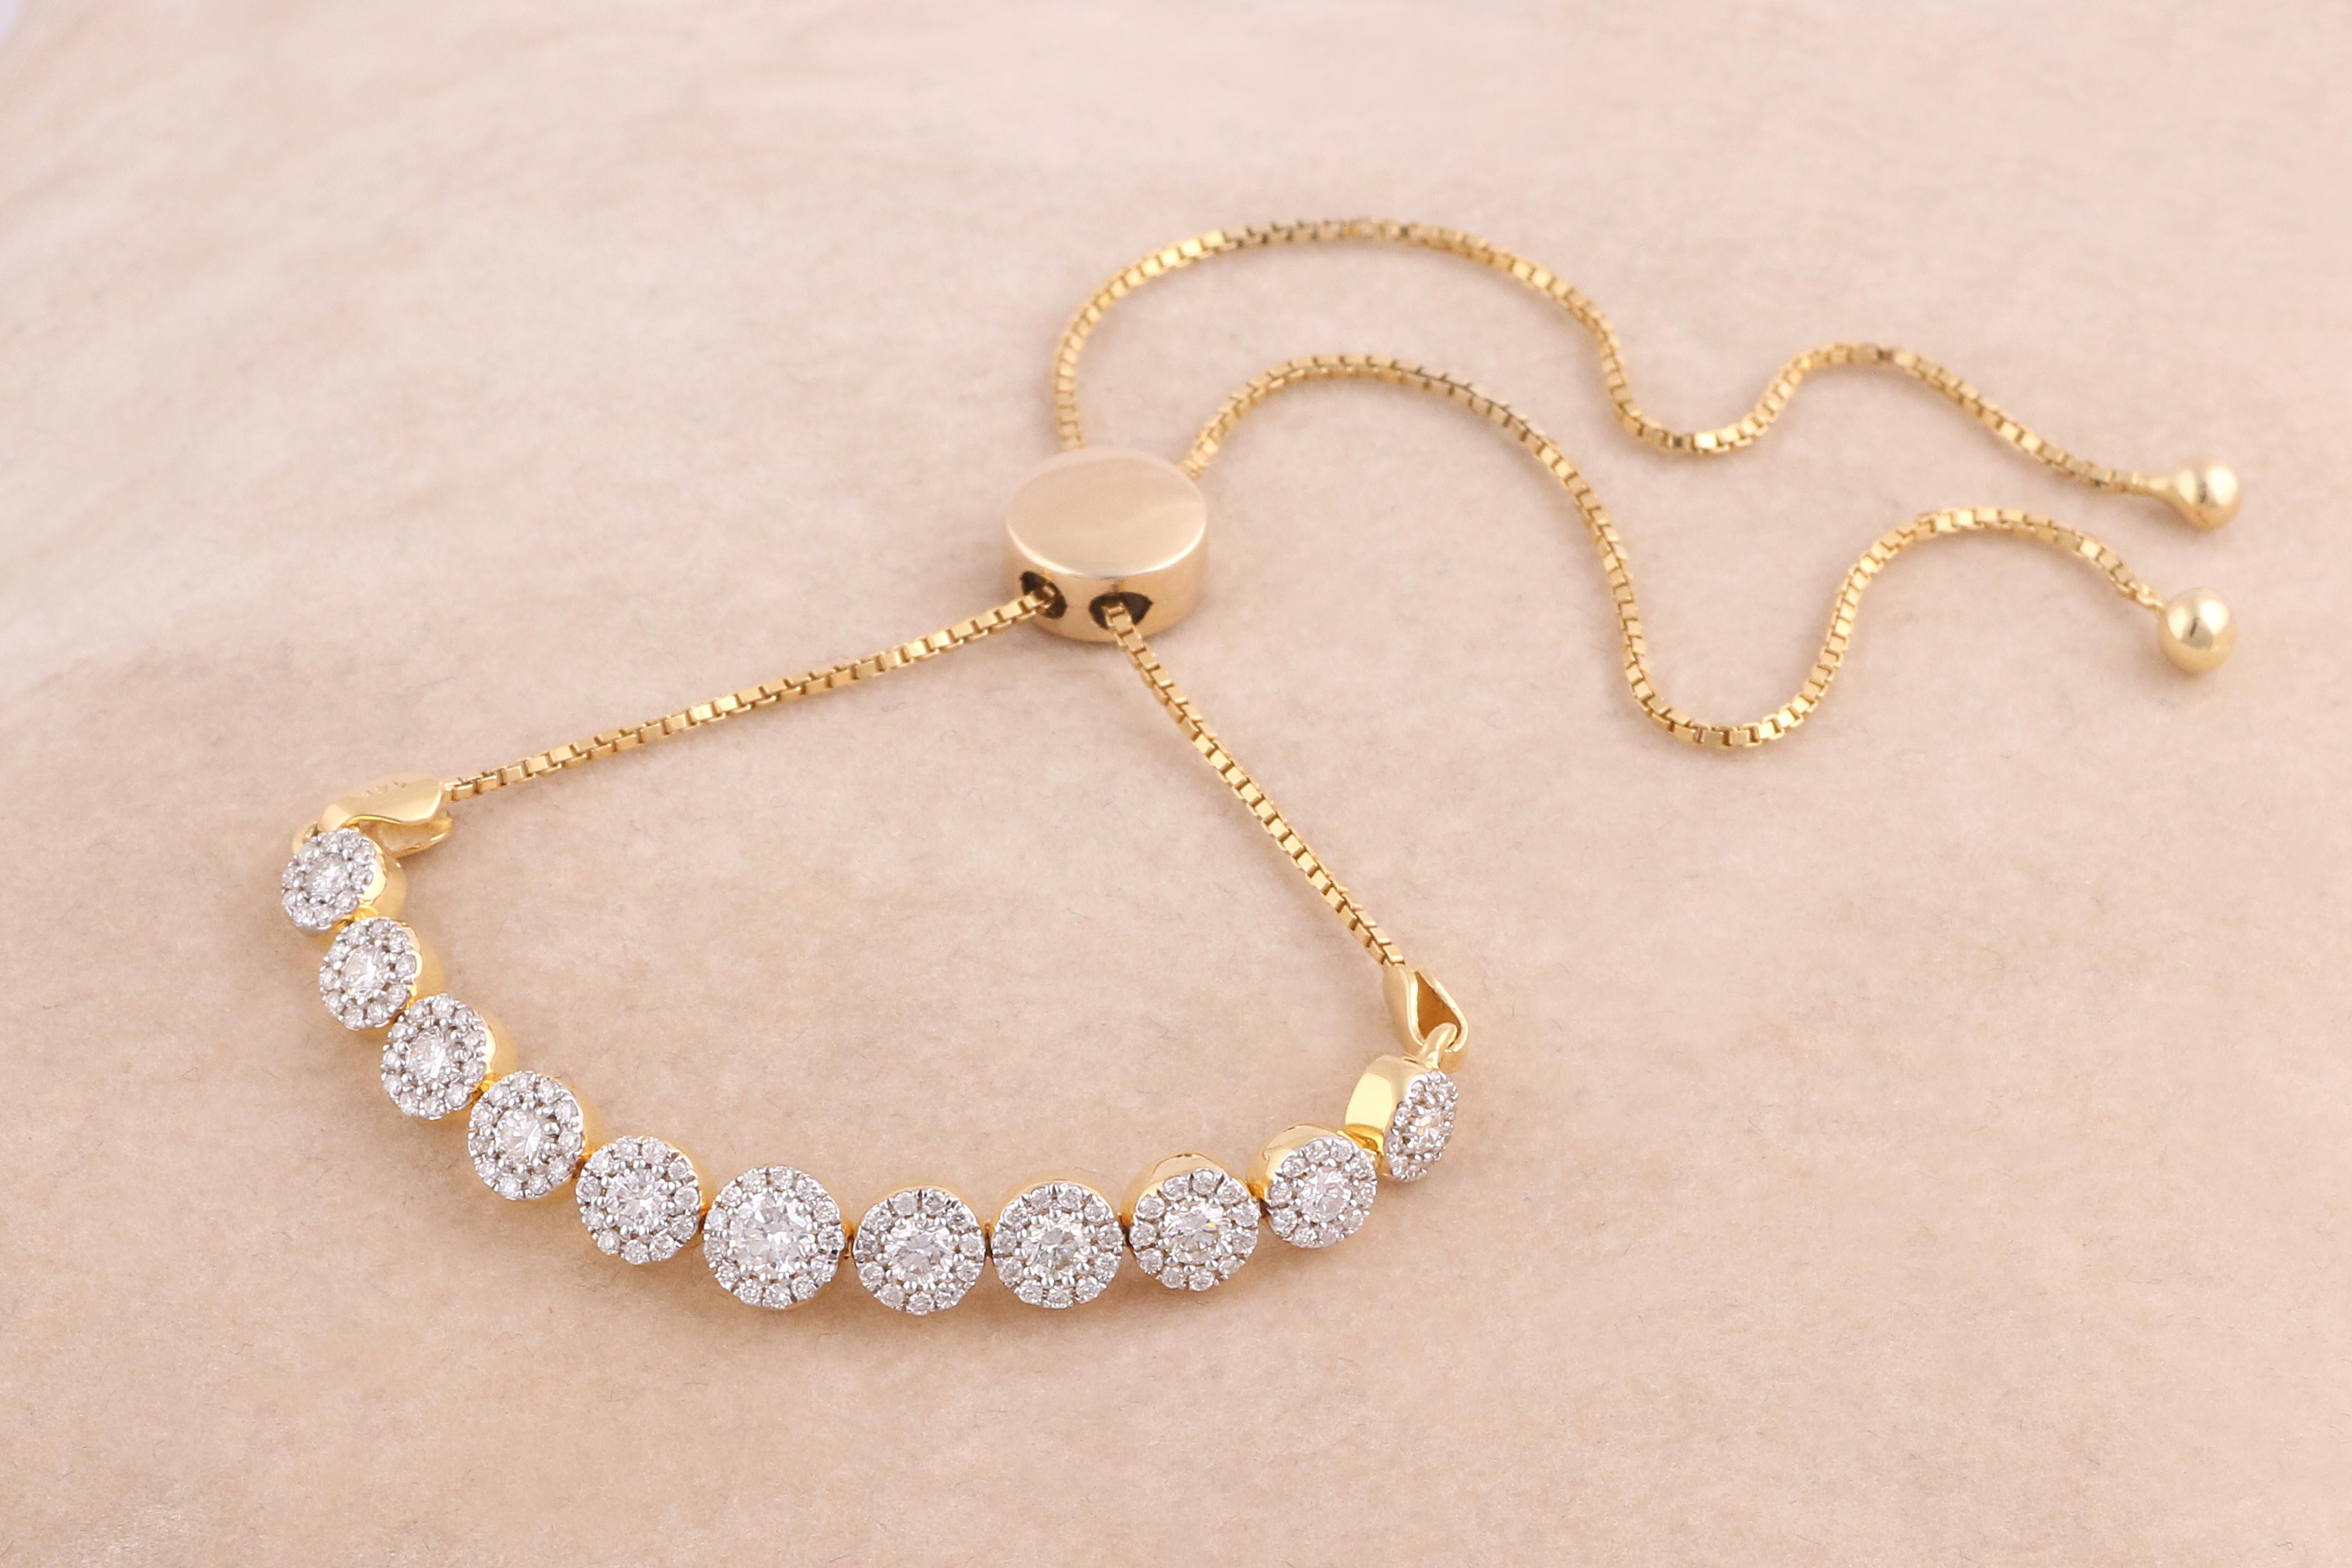 Our gorgeous diamond Bracelet are finely set into the most astonishing designs ranging from modern-era jewels to fascinating classics, and they will certainly rekindle the romance between you and your spouse. Our Diamond Bracelet are a regal